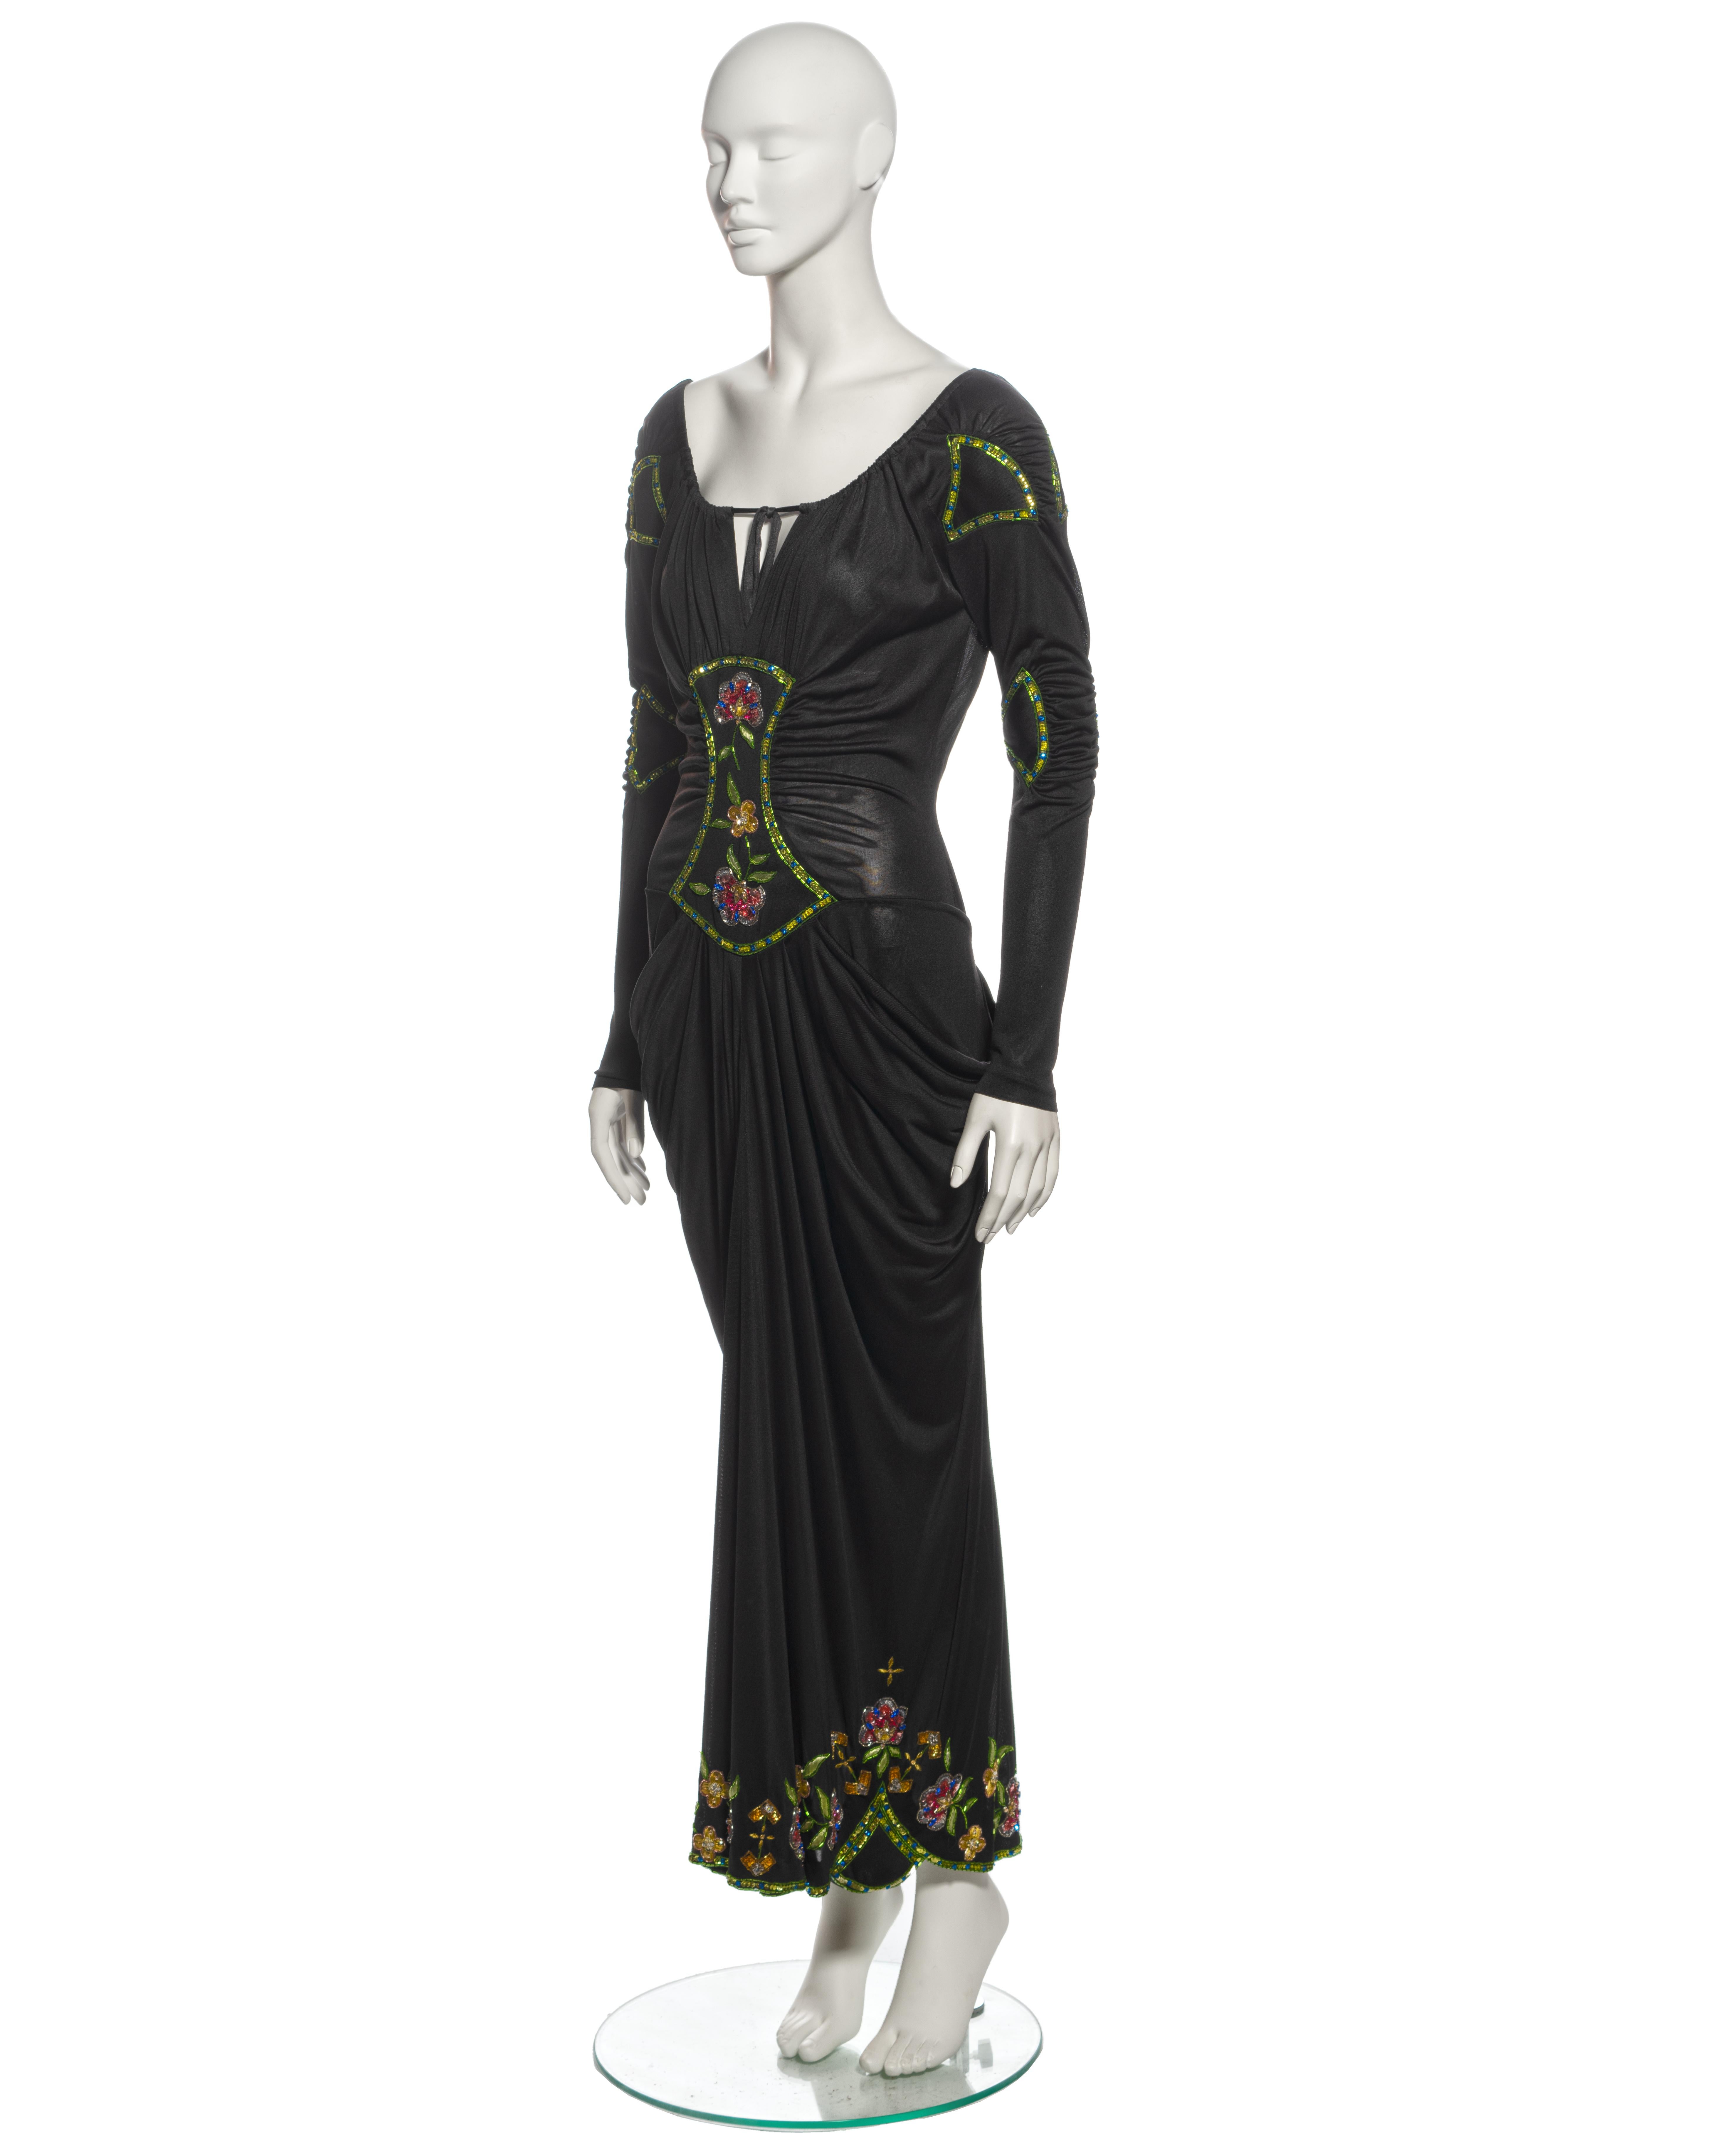 Christian Dior by John Galliano Black Viscose Embellished Draped Dress, ss 2002 For Sale 12